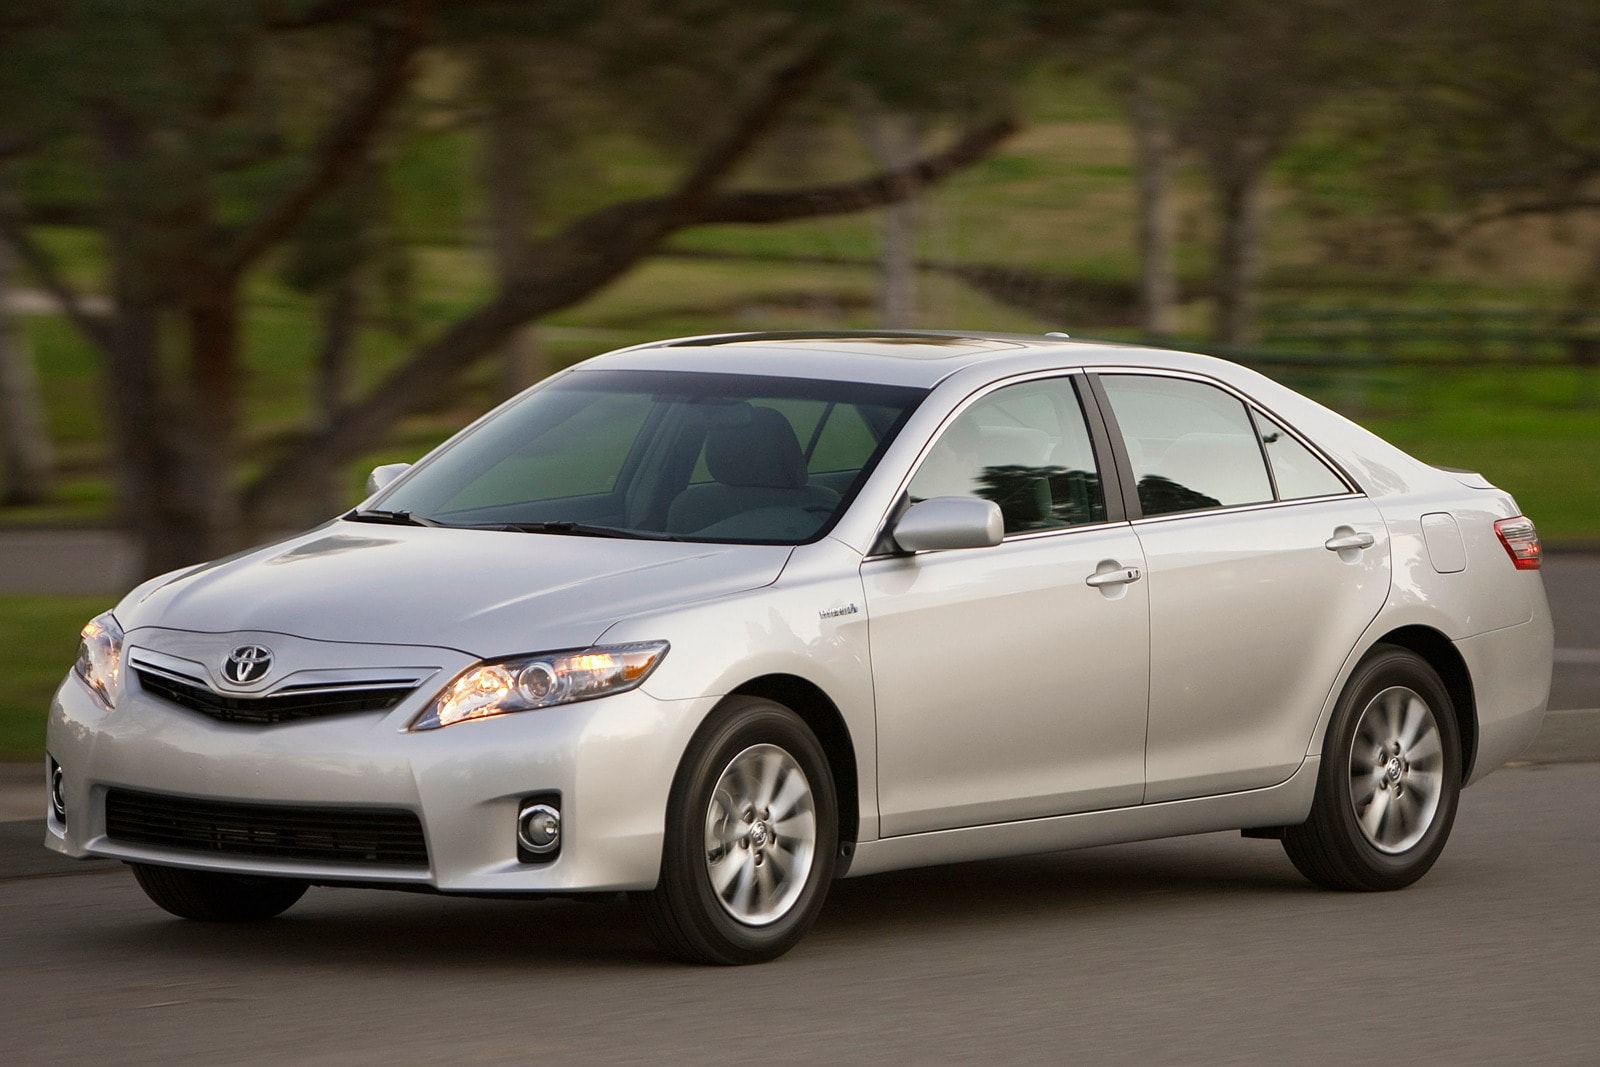 2010 Toyota Camry Hybrid Review & Ratings | Edmunds